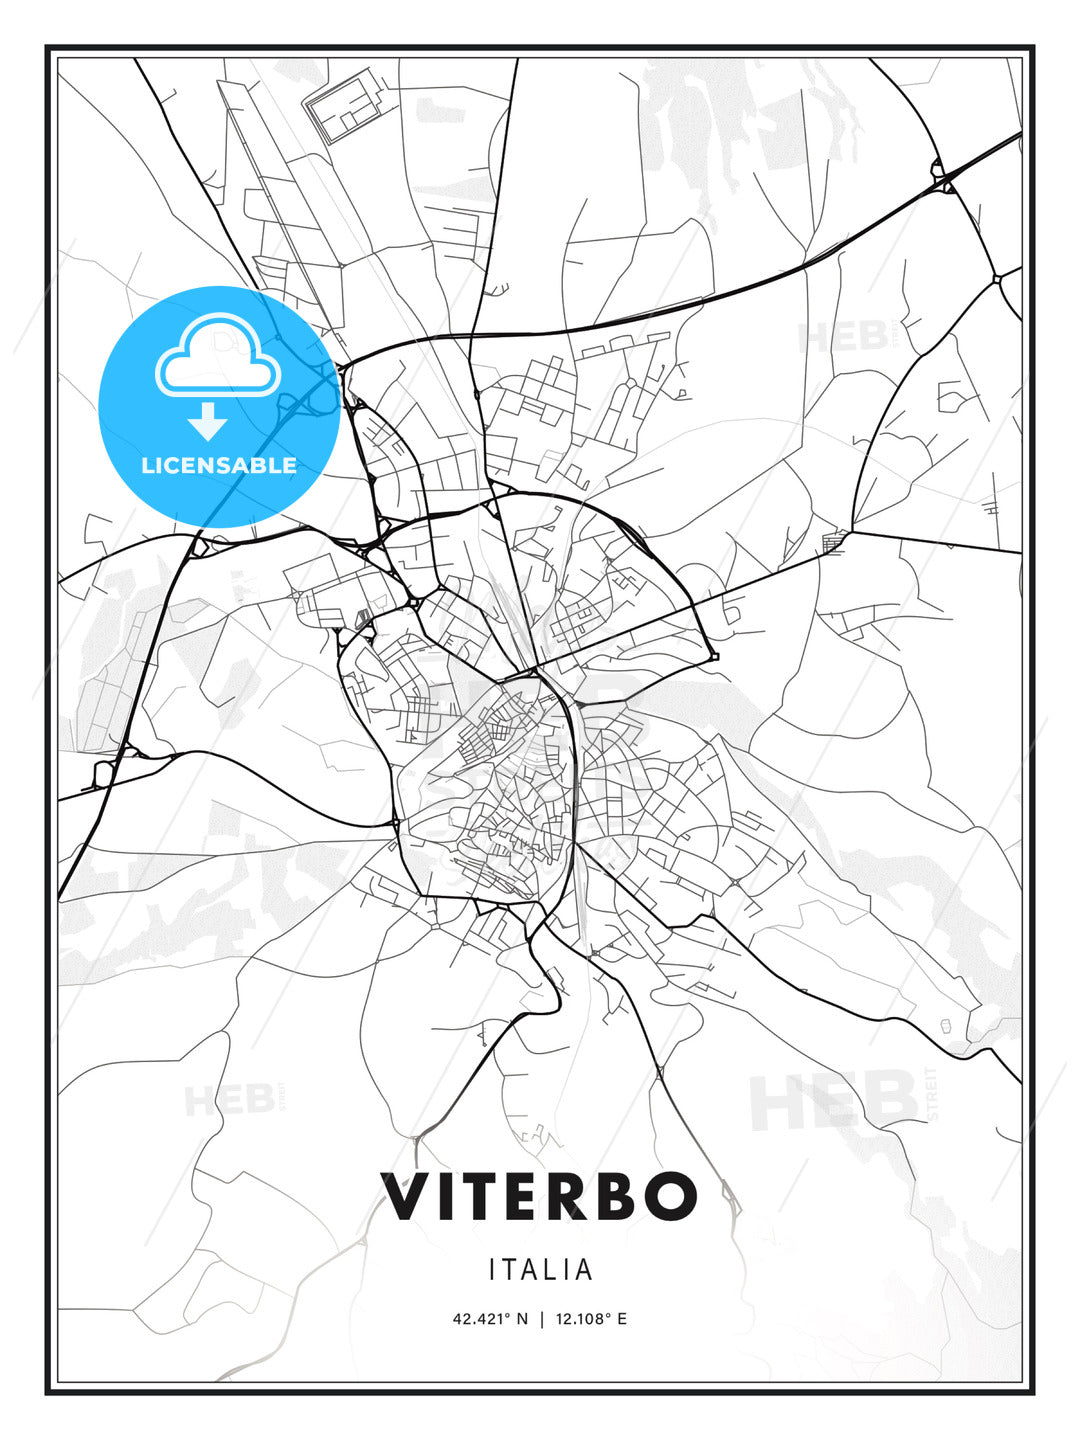 Viterbo, Italy, Modern Print Template in Various Formats - HEBSTREITS Sketches